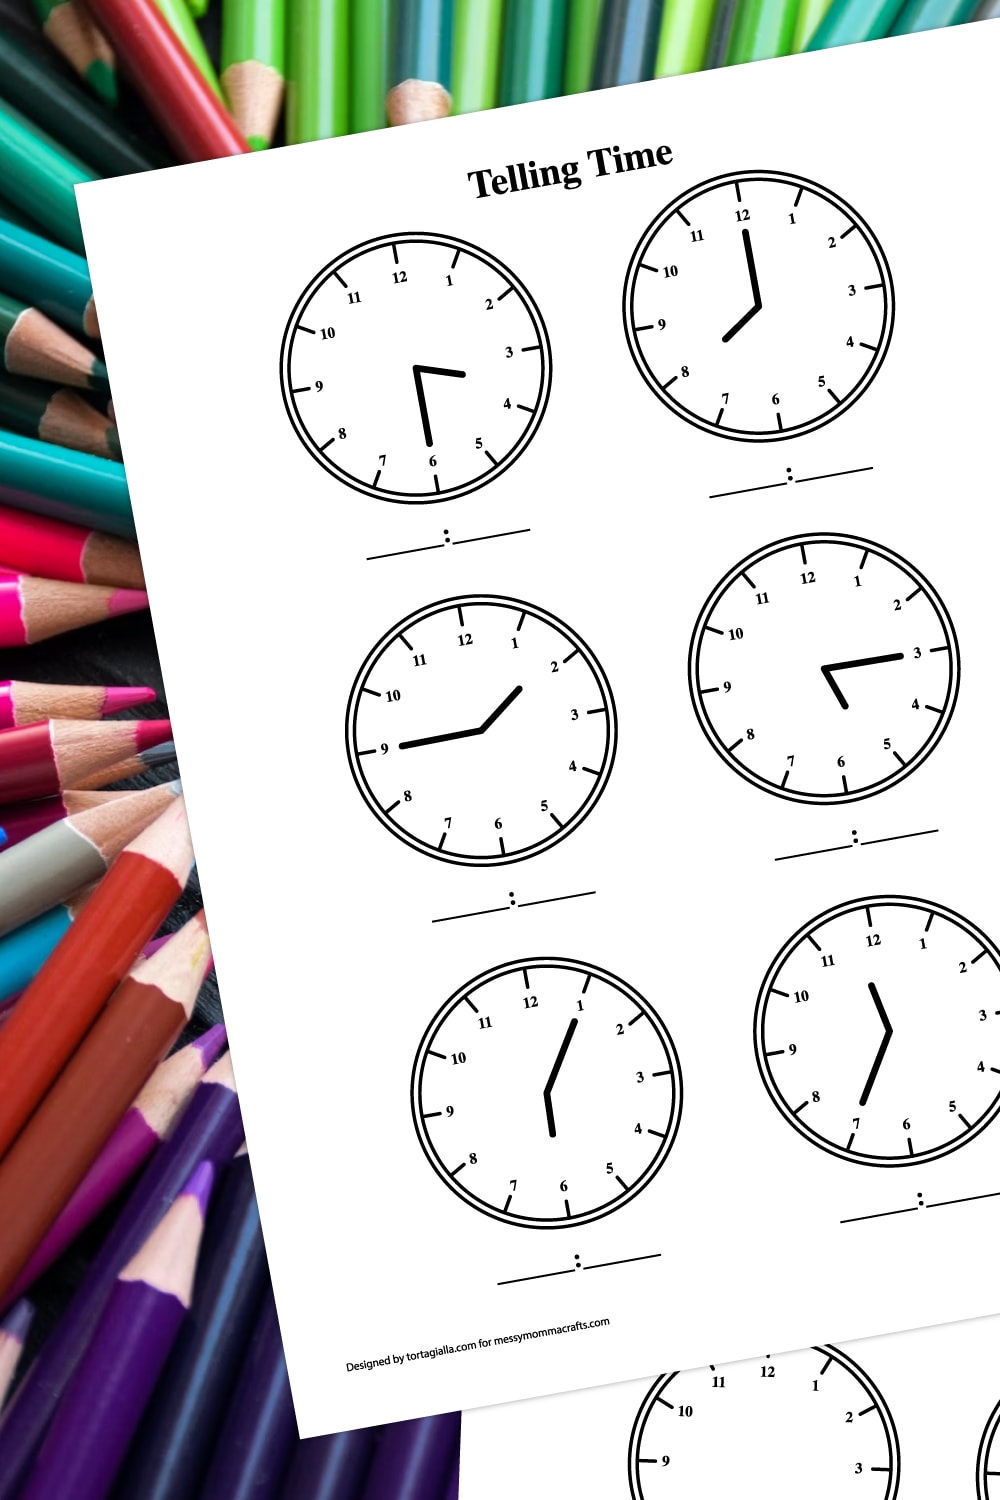  Background with a bunch of colored pencils in circular pattern with cropped telling time worksheets preview on top. 